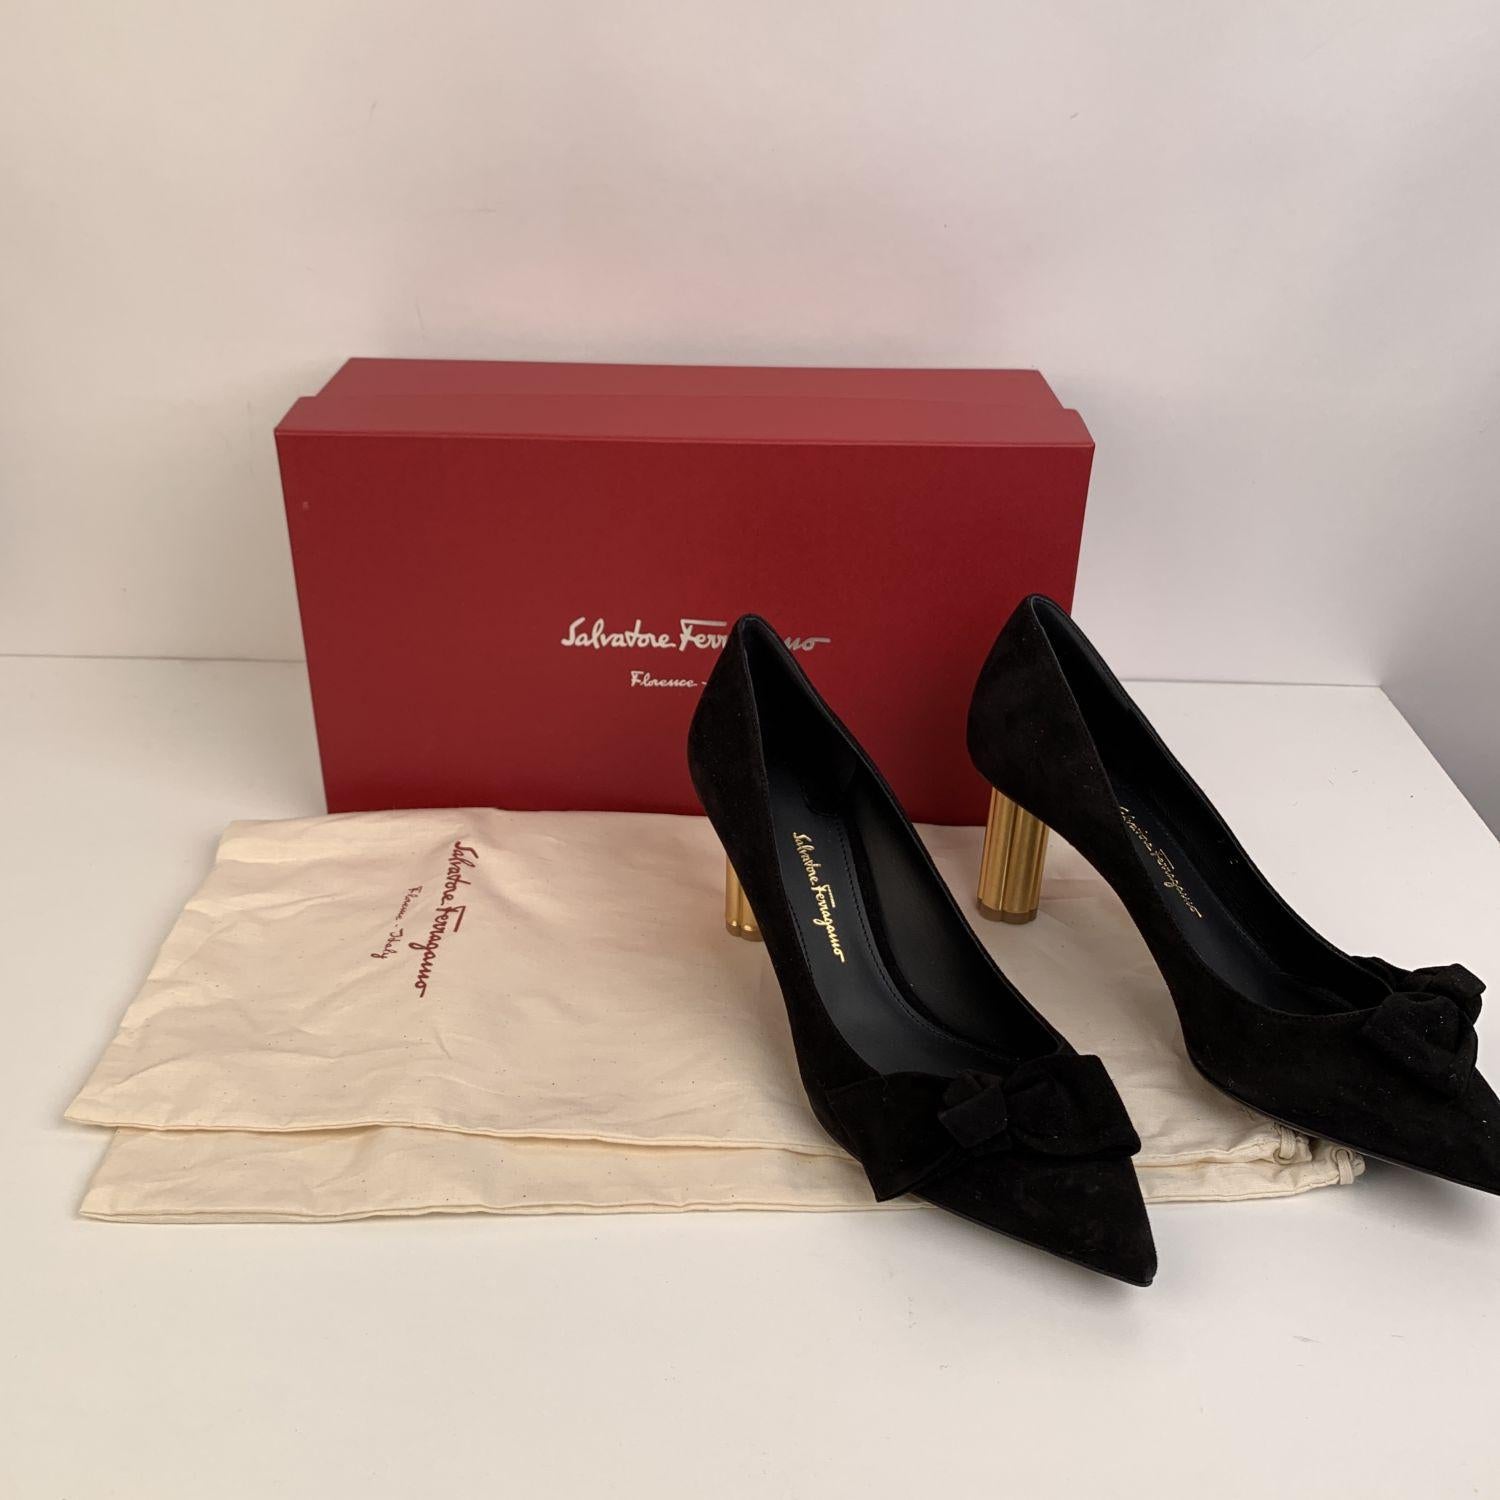 Classic Salvatore Ferragamo 'Garlate' closed toe pumps. Crafted in black suede. They feature a pointed toe, slip on design and gold metal coloumn flower-shaped covered heel. bow detailing on the toes. Leather insole and outsole. Heels Height: 2.75